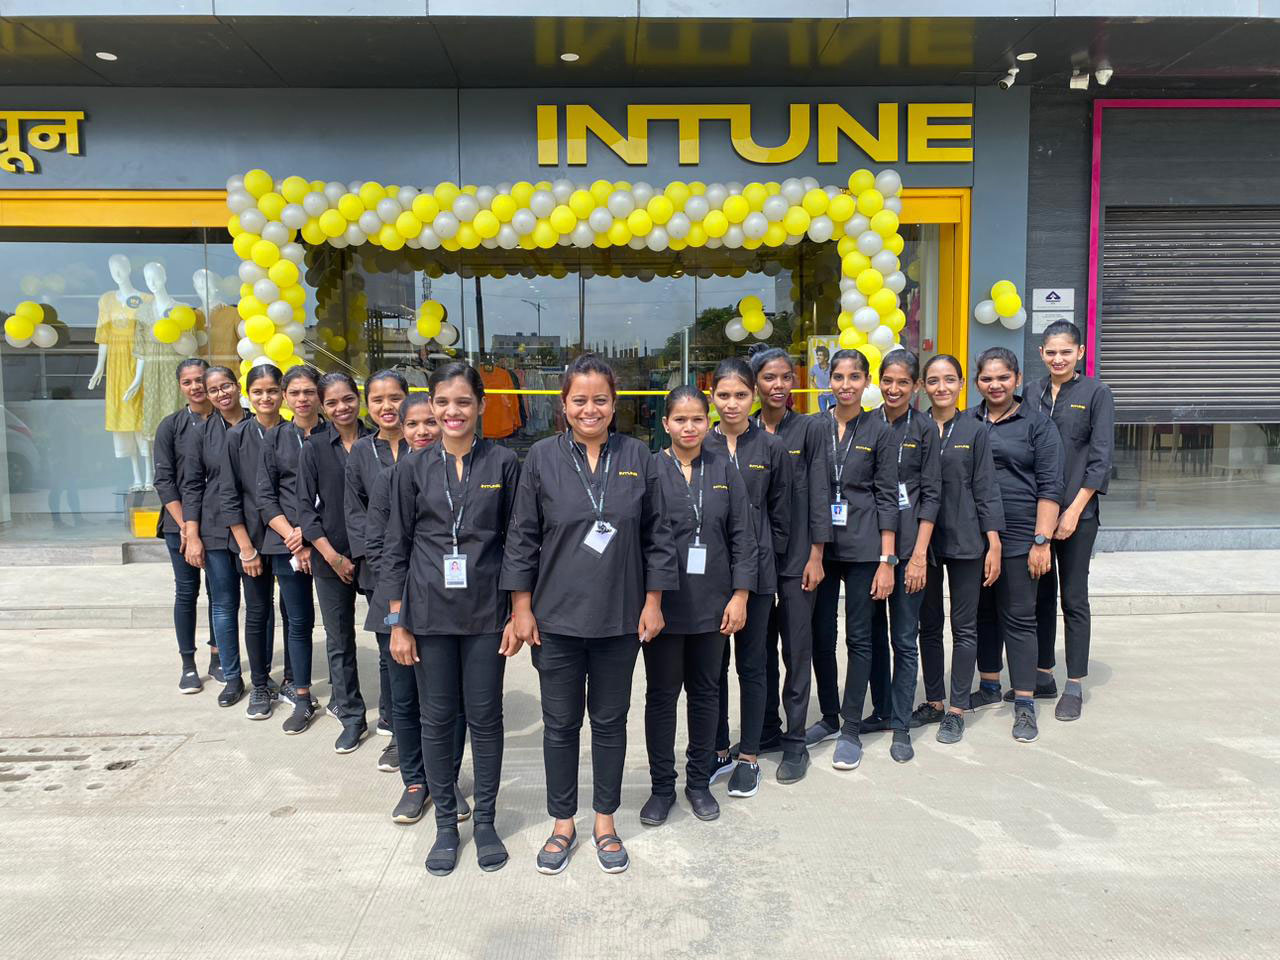 Intune store: Employees standing in front of store